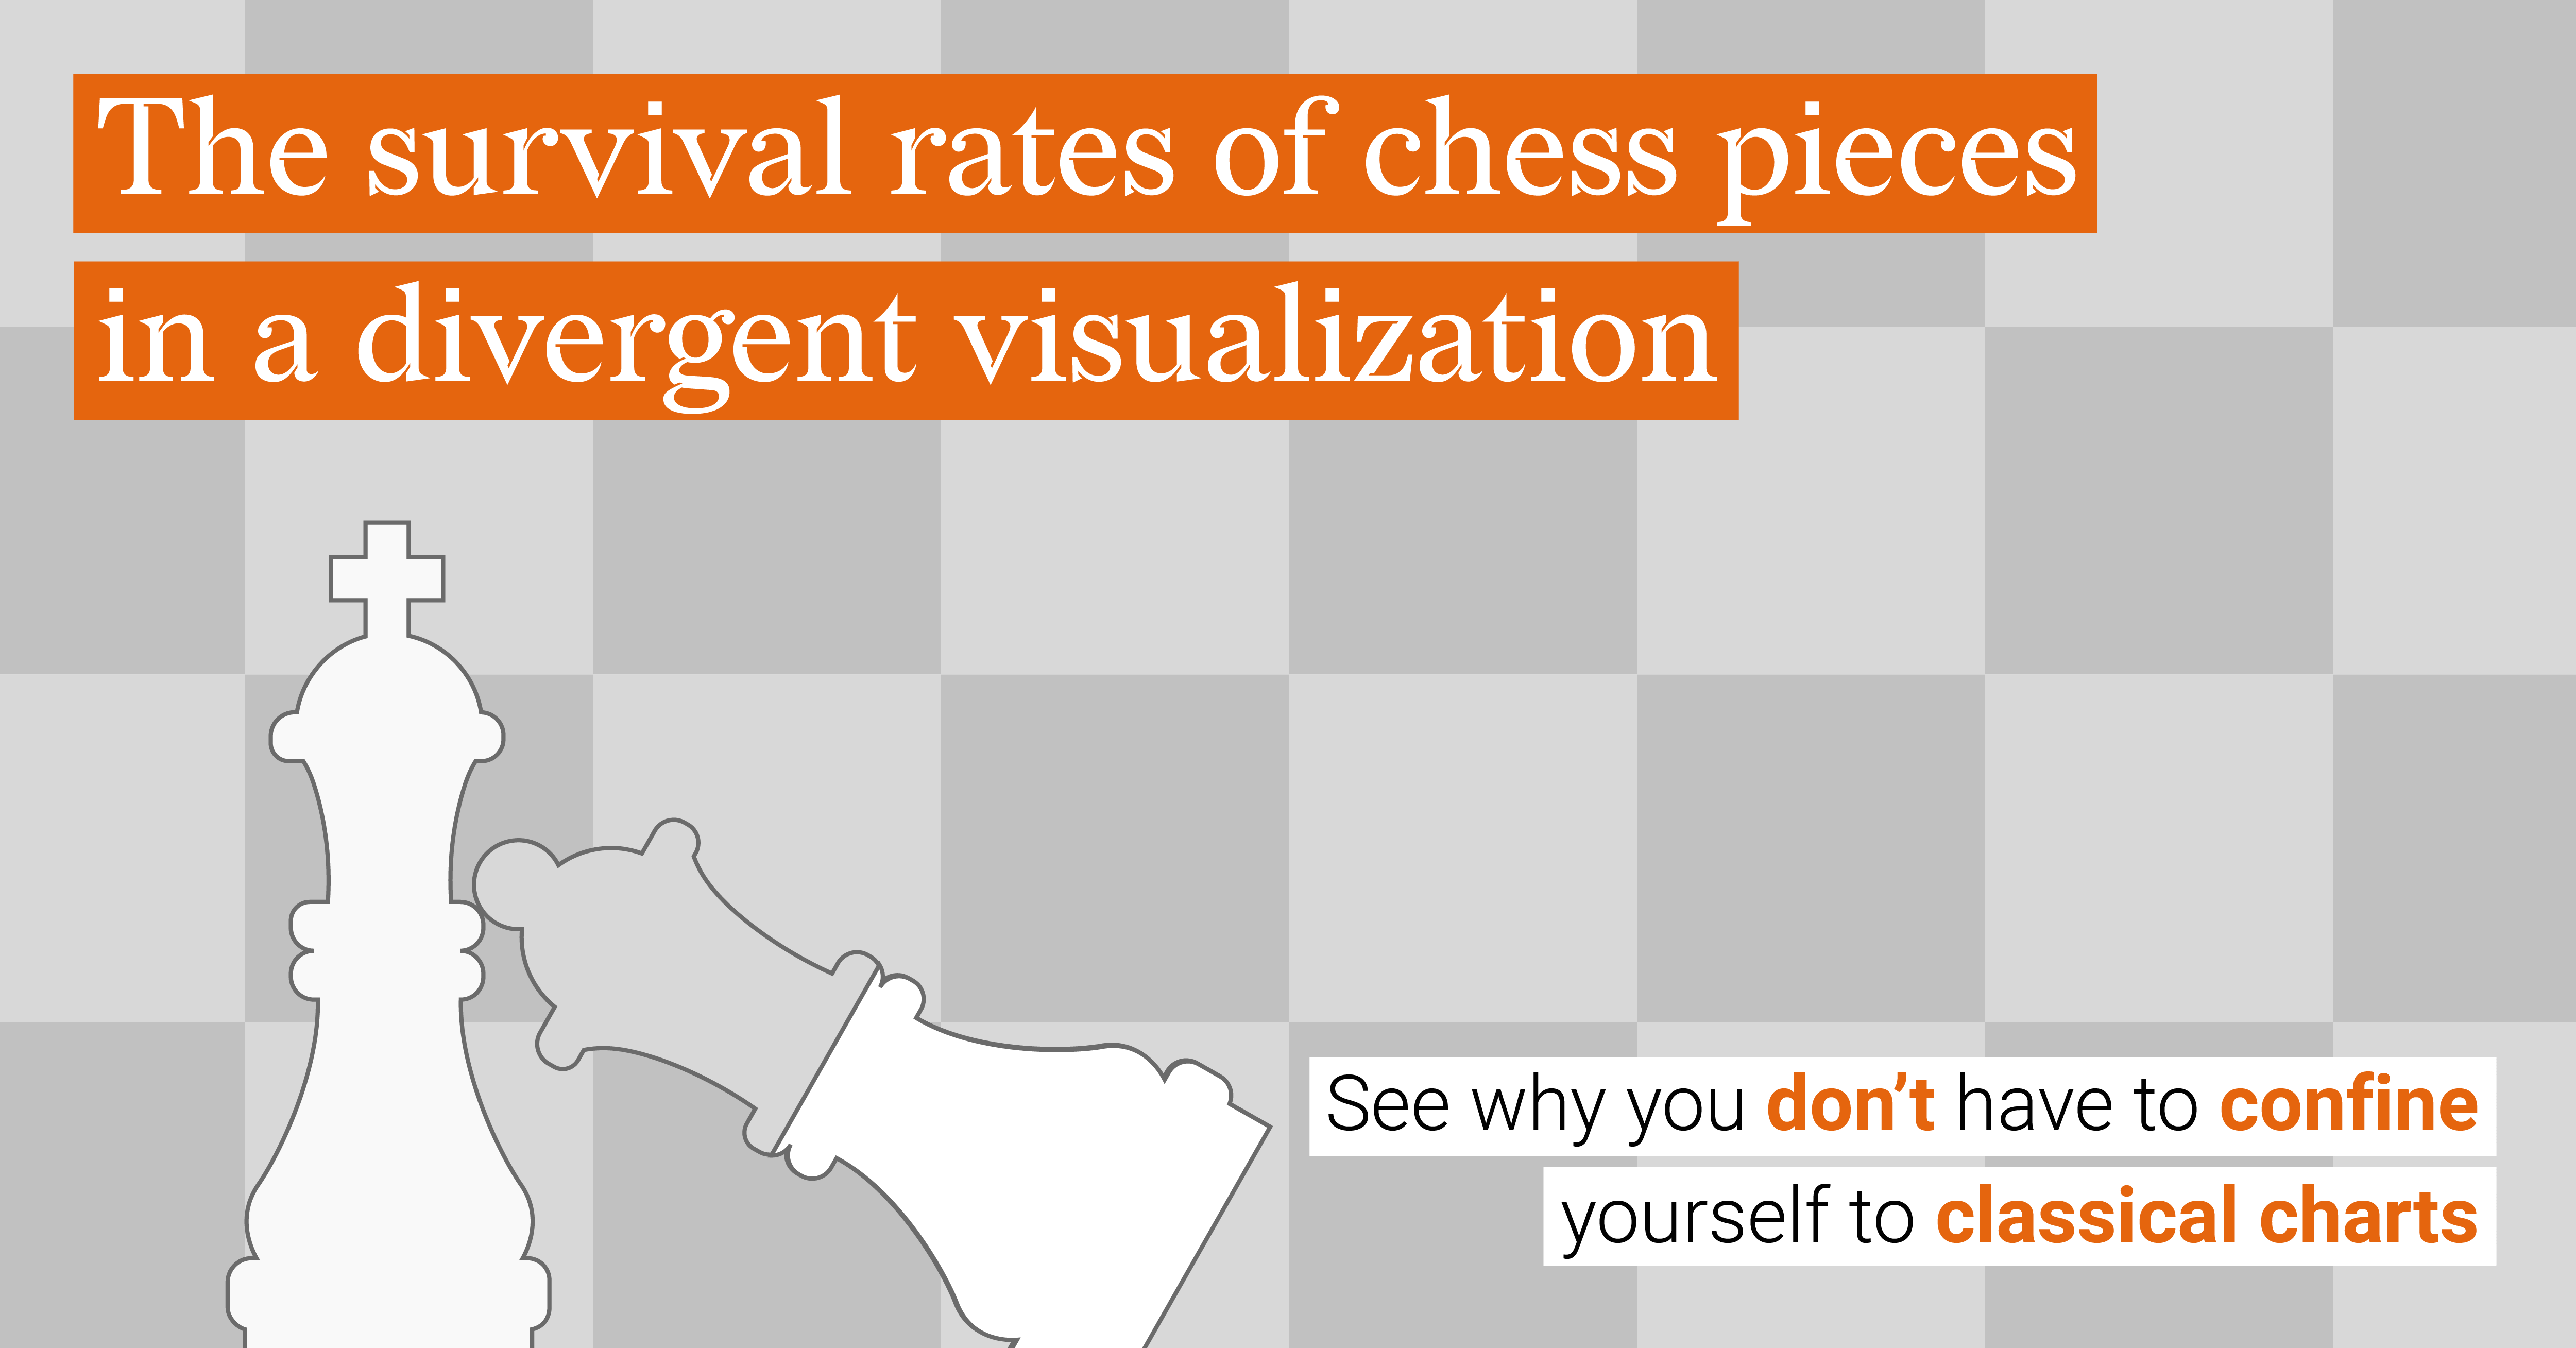 The survival rates of chess pieces in a divergent visualization